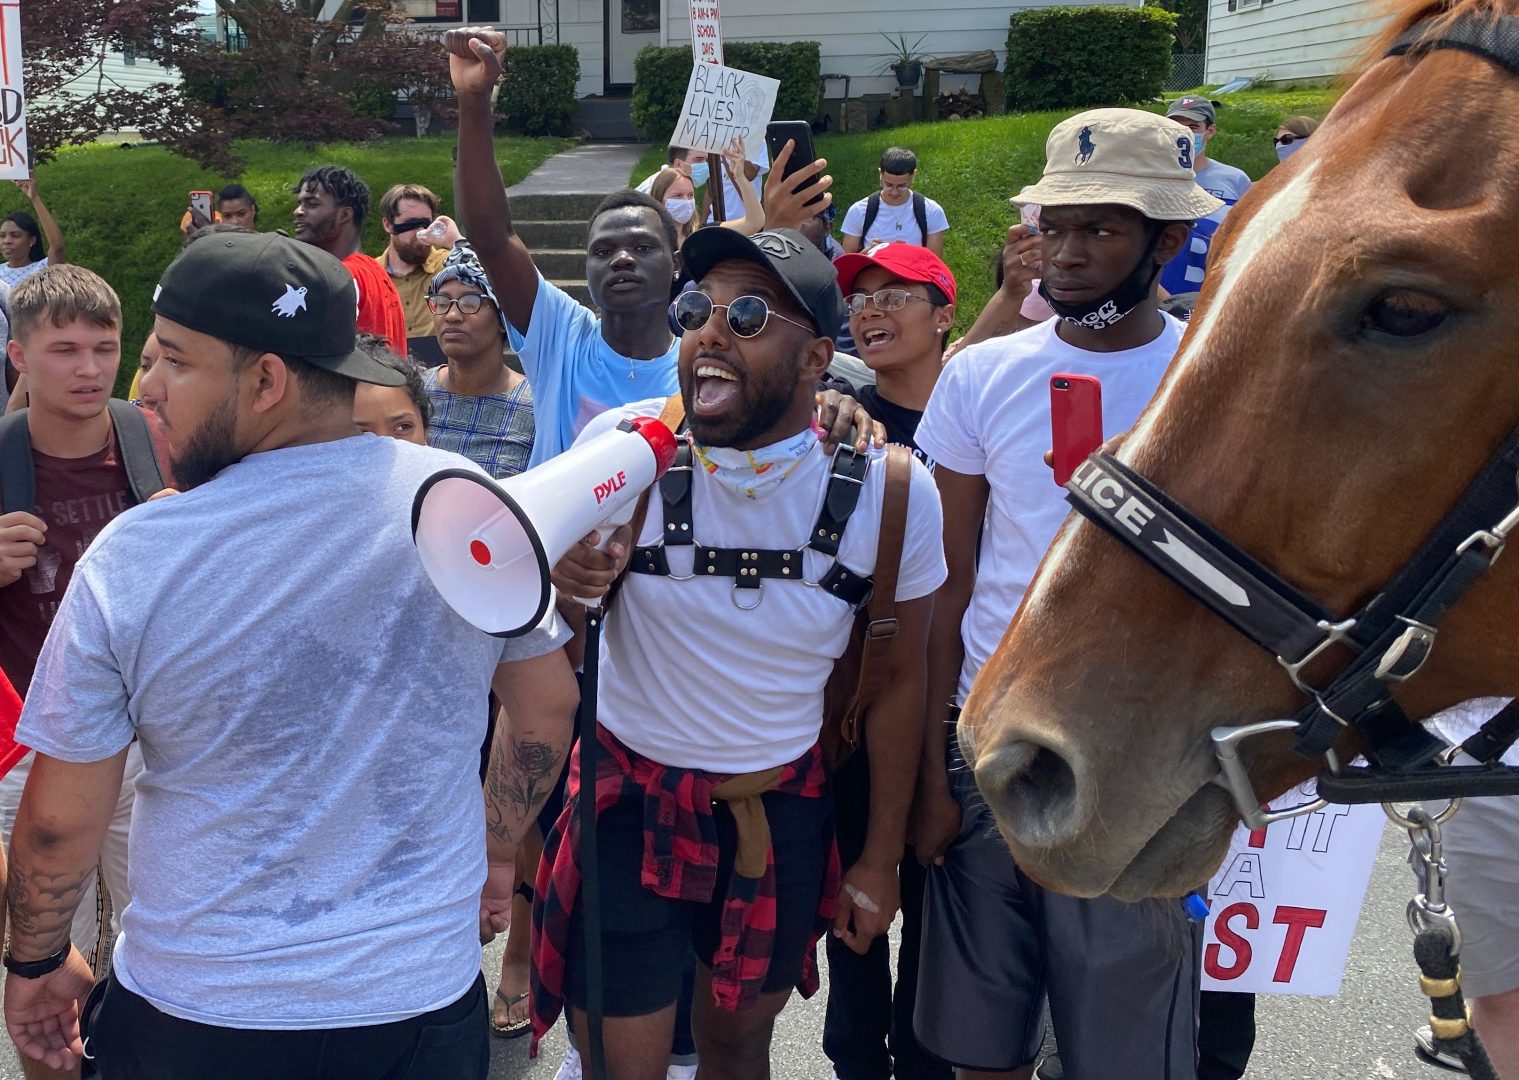 Kareem Anthony speaks into a bullhorn during a protest outside the Lancaster Recreation Center ahead of a planned visit by Democratic presidential candidate Joe Biden on Thursday, June 25, 2020.